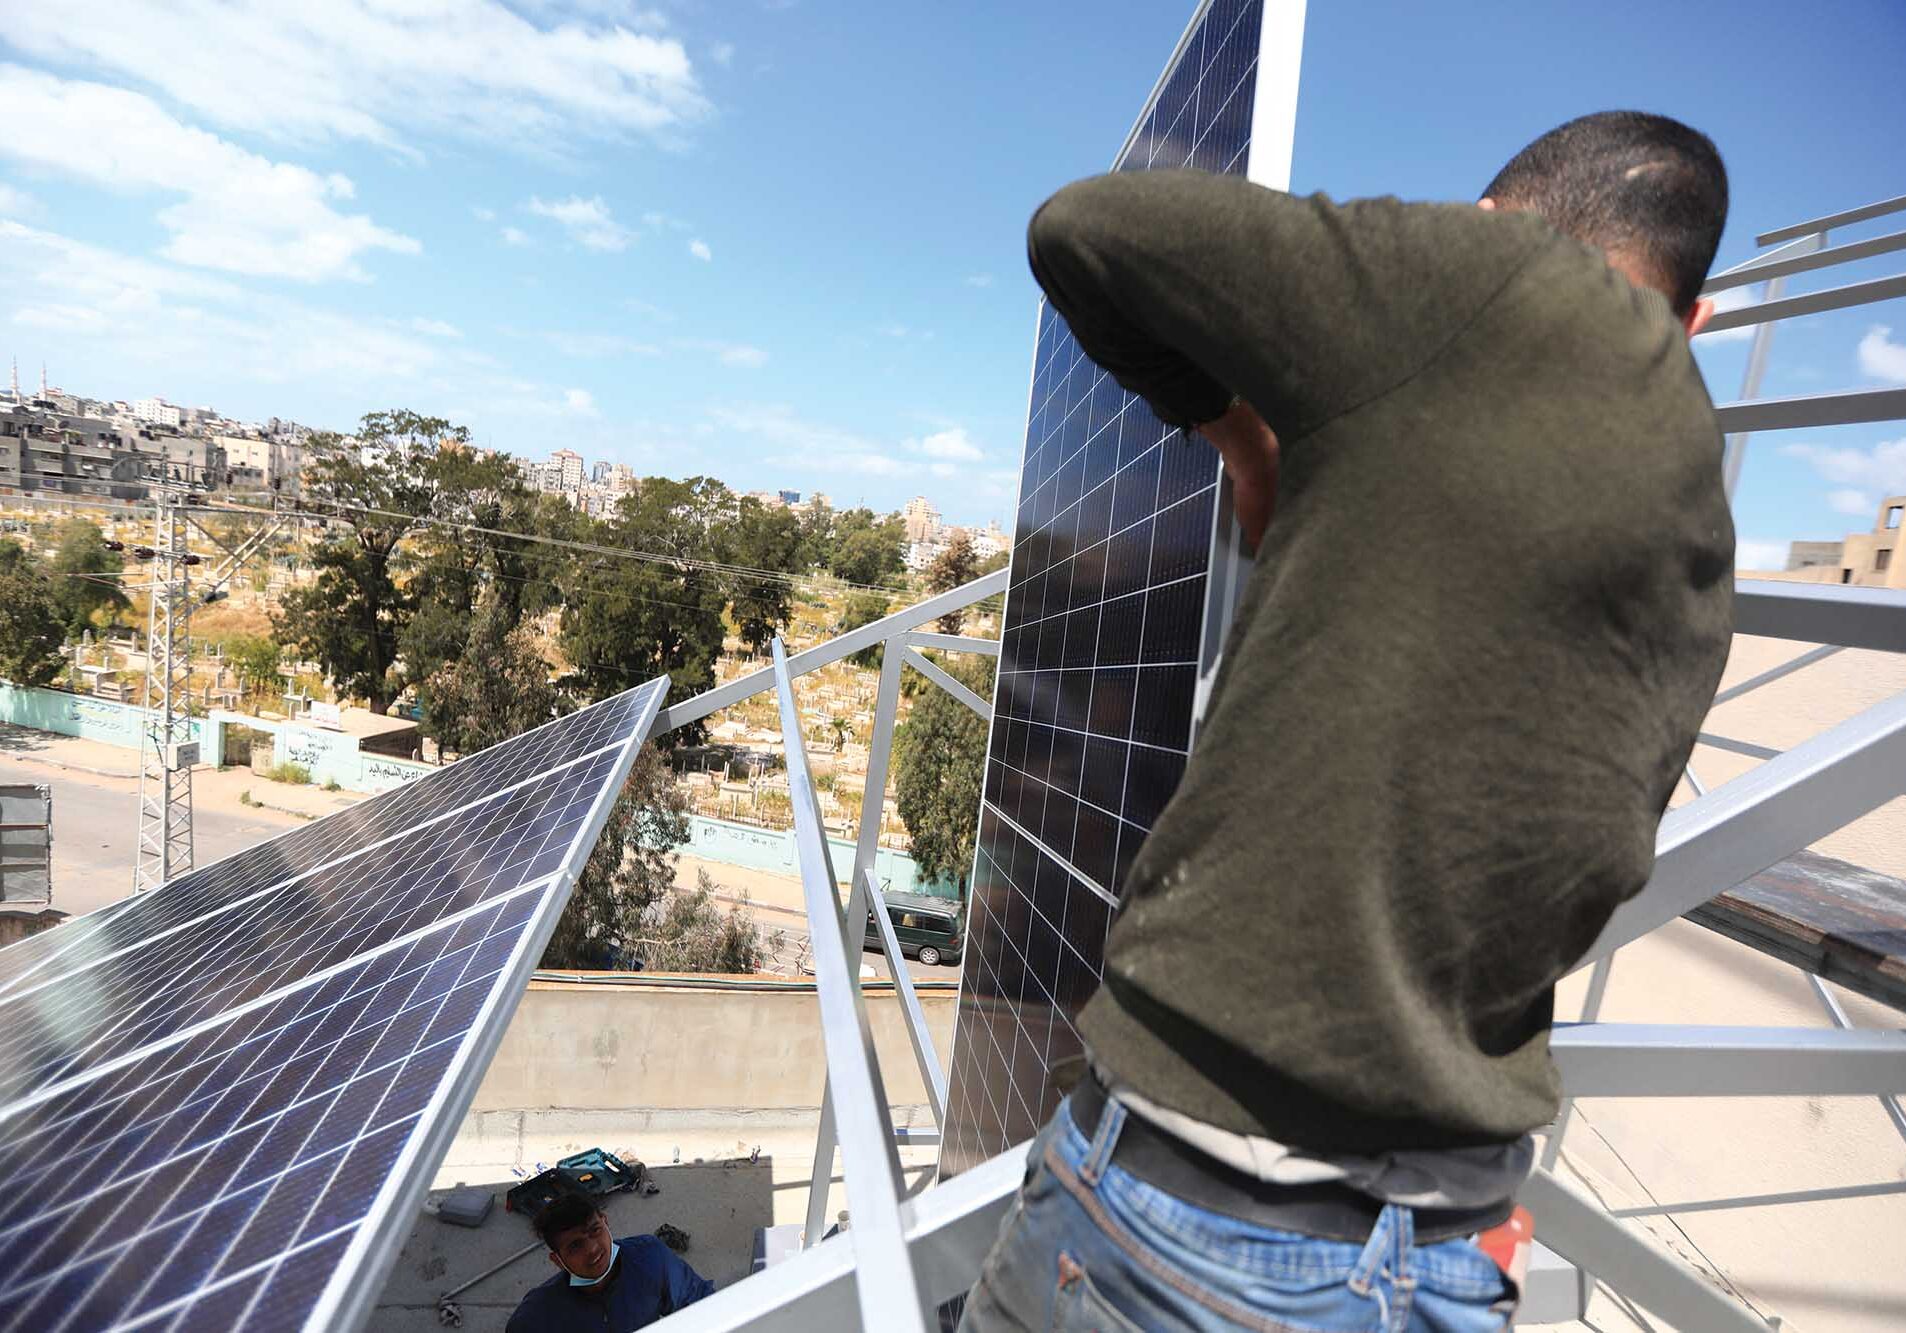 Anera installed a solar power system
at the Palestinian Red Crescent
Society in Deir Al Balah, which
benefits more than 6,000 patients
every month.